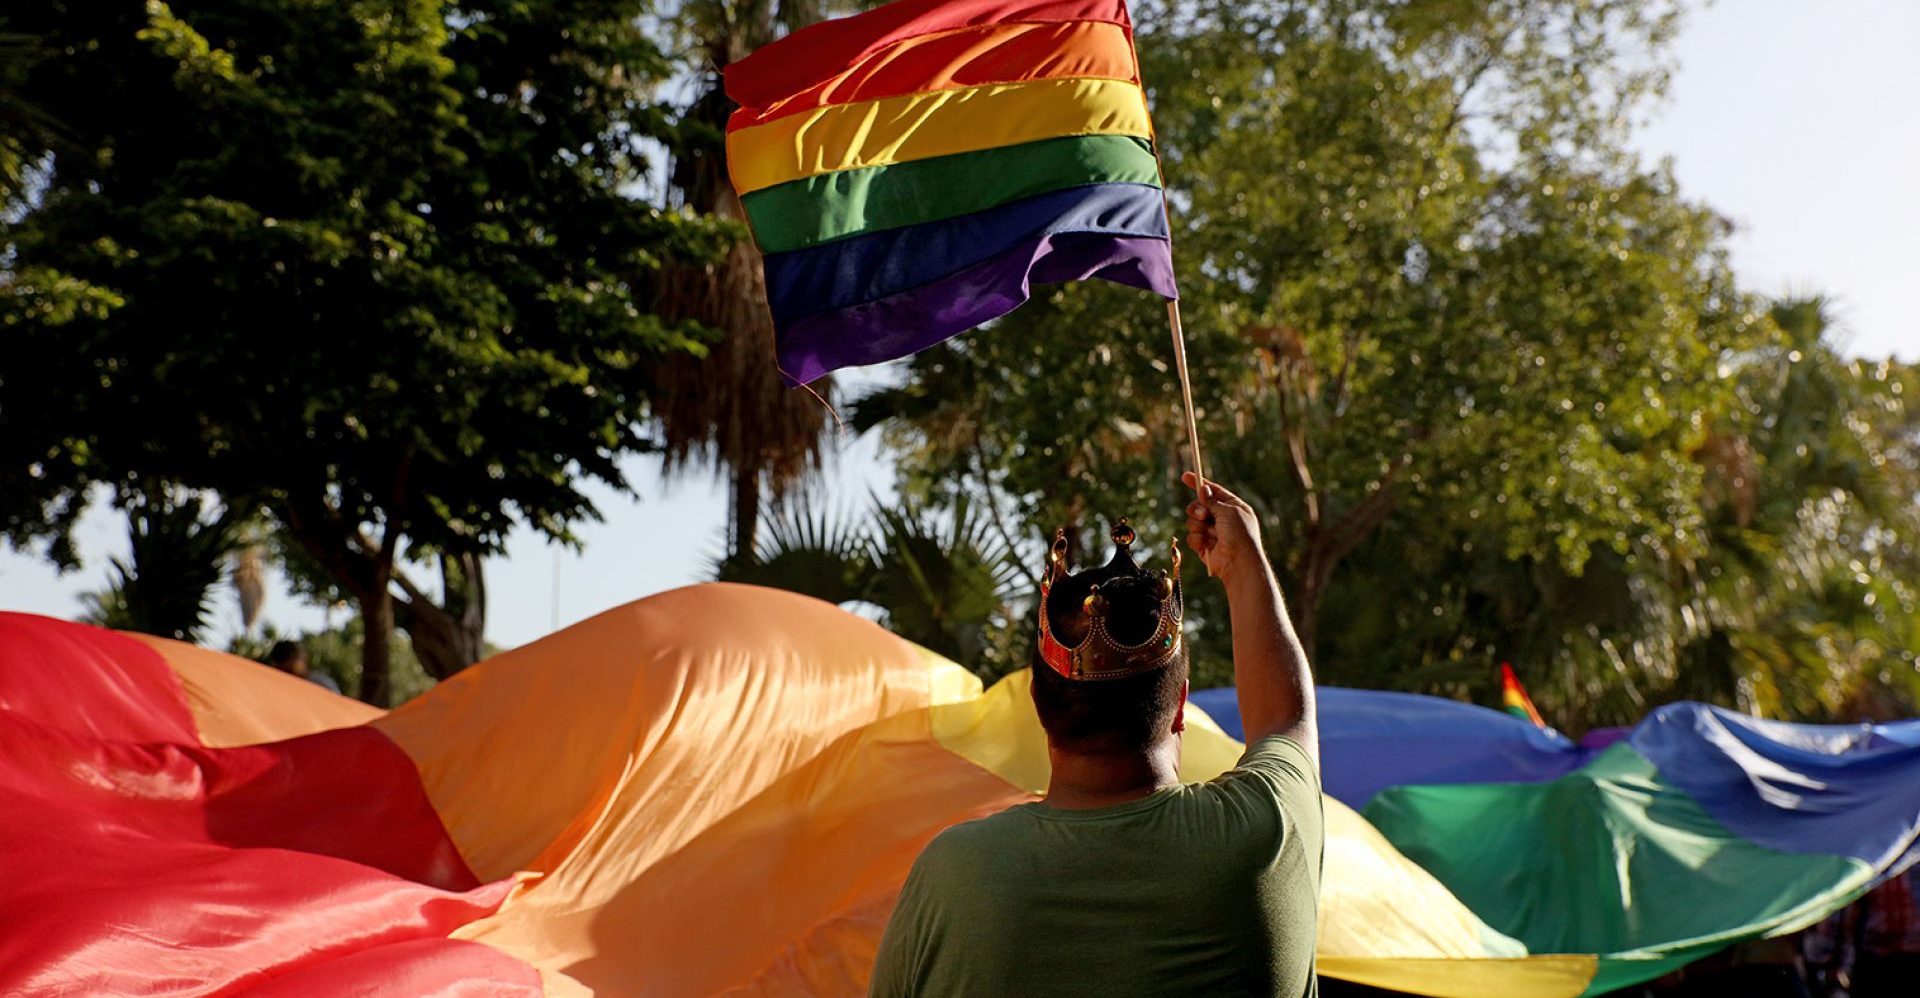 Judge denies collective protection, asks them for evidence that they are LGBTI people